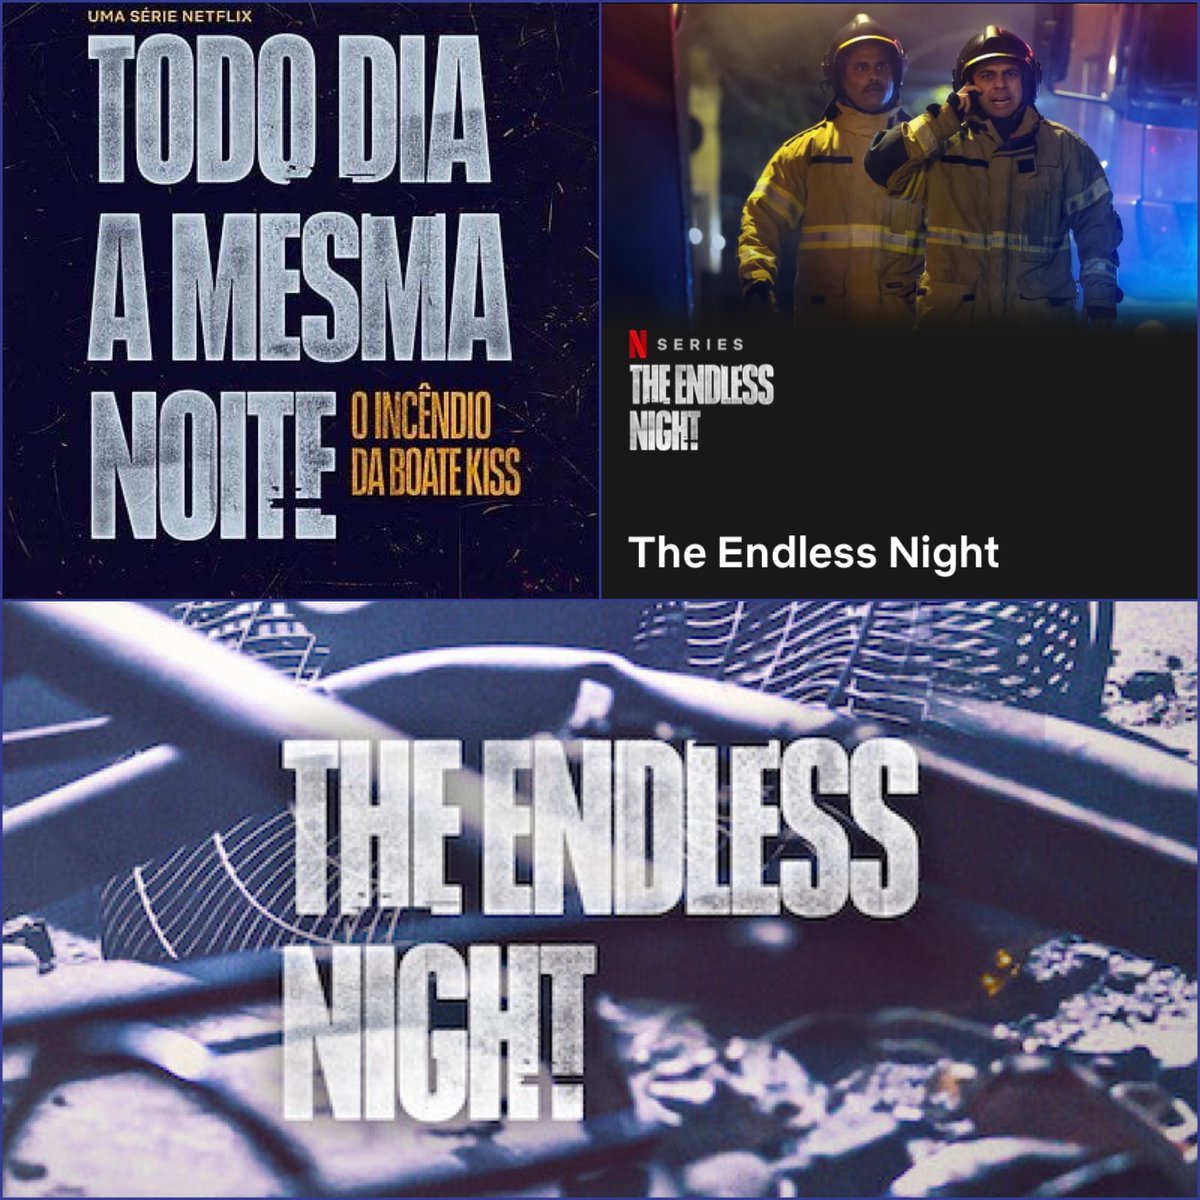 MUST WATCH! #TheEndlessNight / #TodoDiaAMesmaNoite premieres TODAY on @netflix. An important series about justice & loss, based on the true story of the Kiss Nightclub fire. Dubs & subtitles available in English and 30 languages. Bravo, @vamosverfilmes! #mustwatch